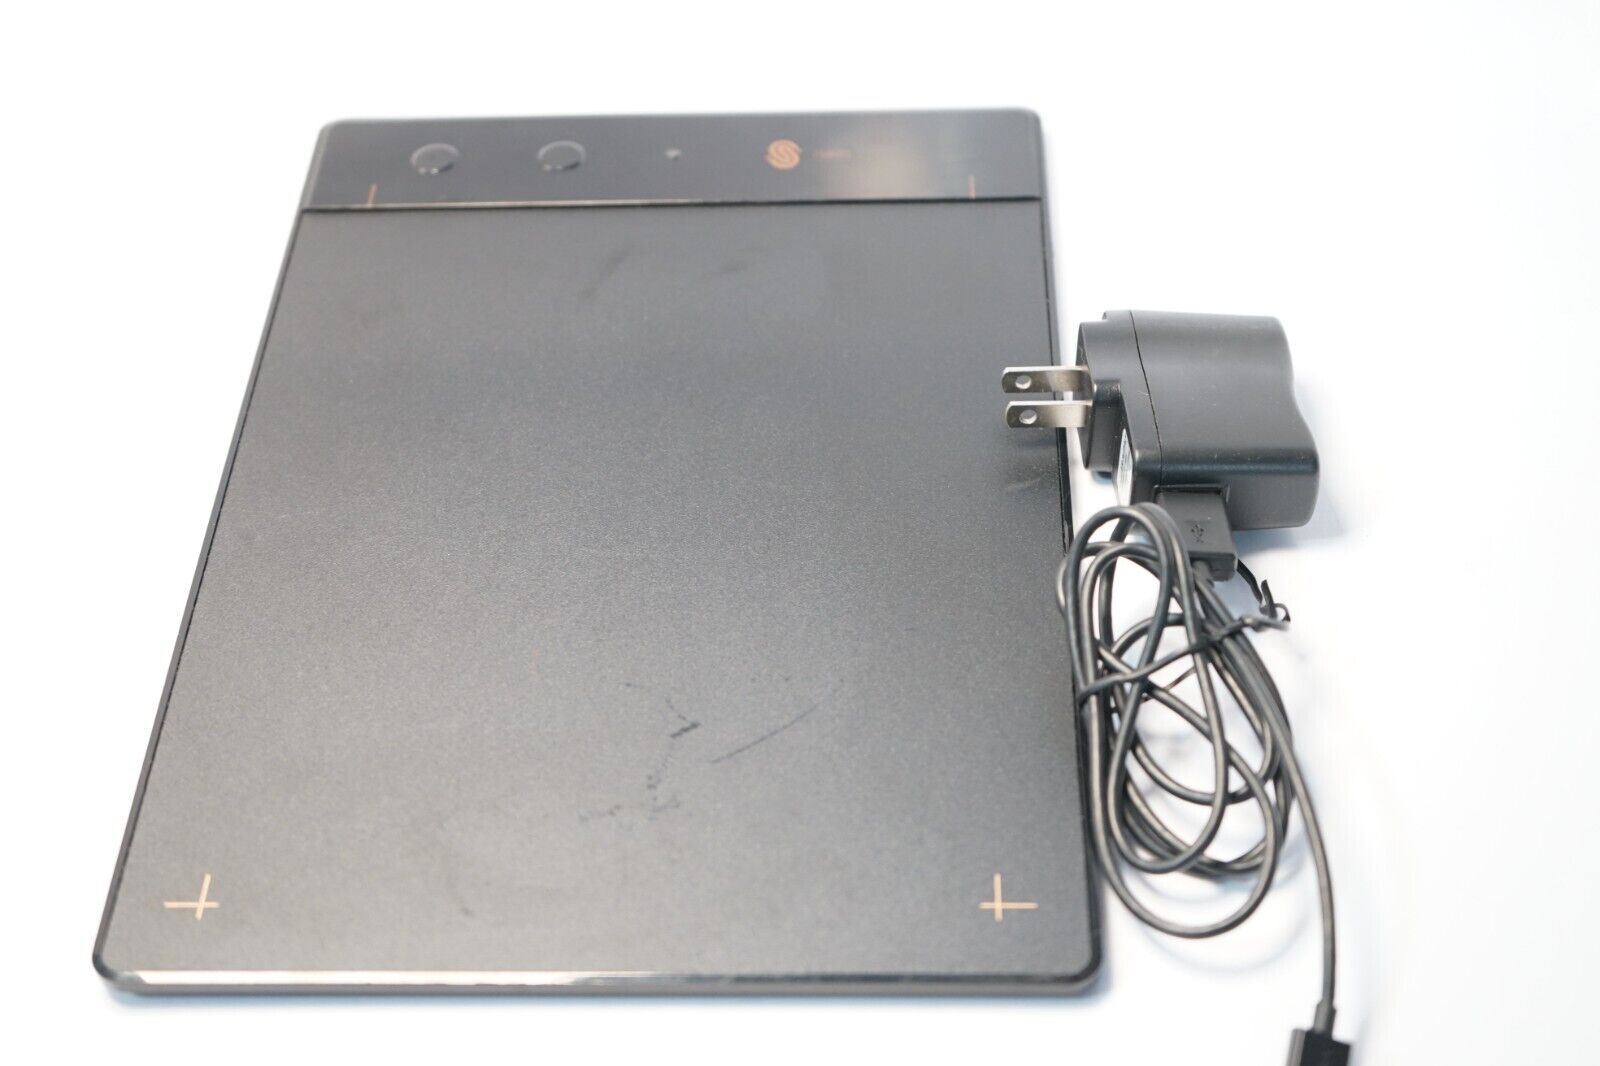 ISKN THE SLATE Graphic Tablet Drawing Pad ONLY No pen or accessories